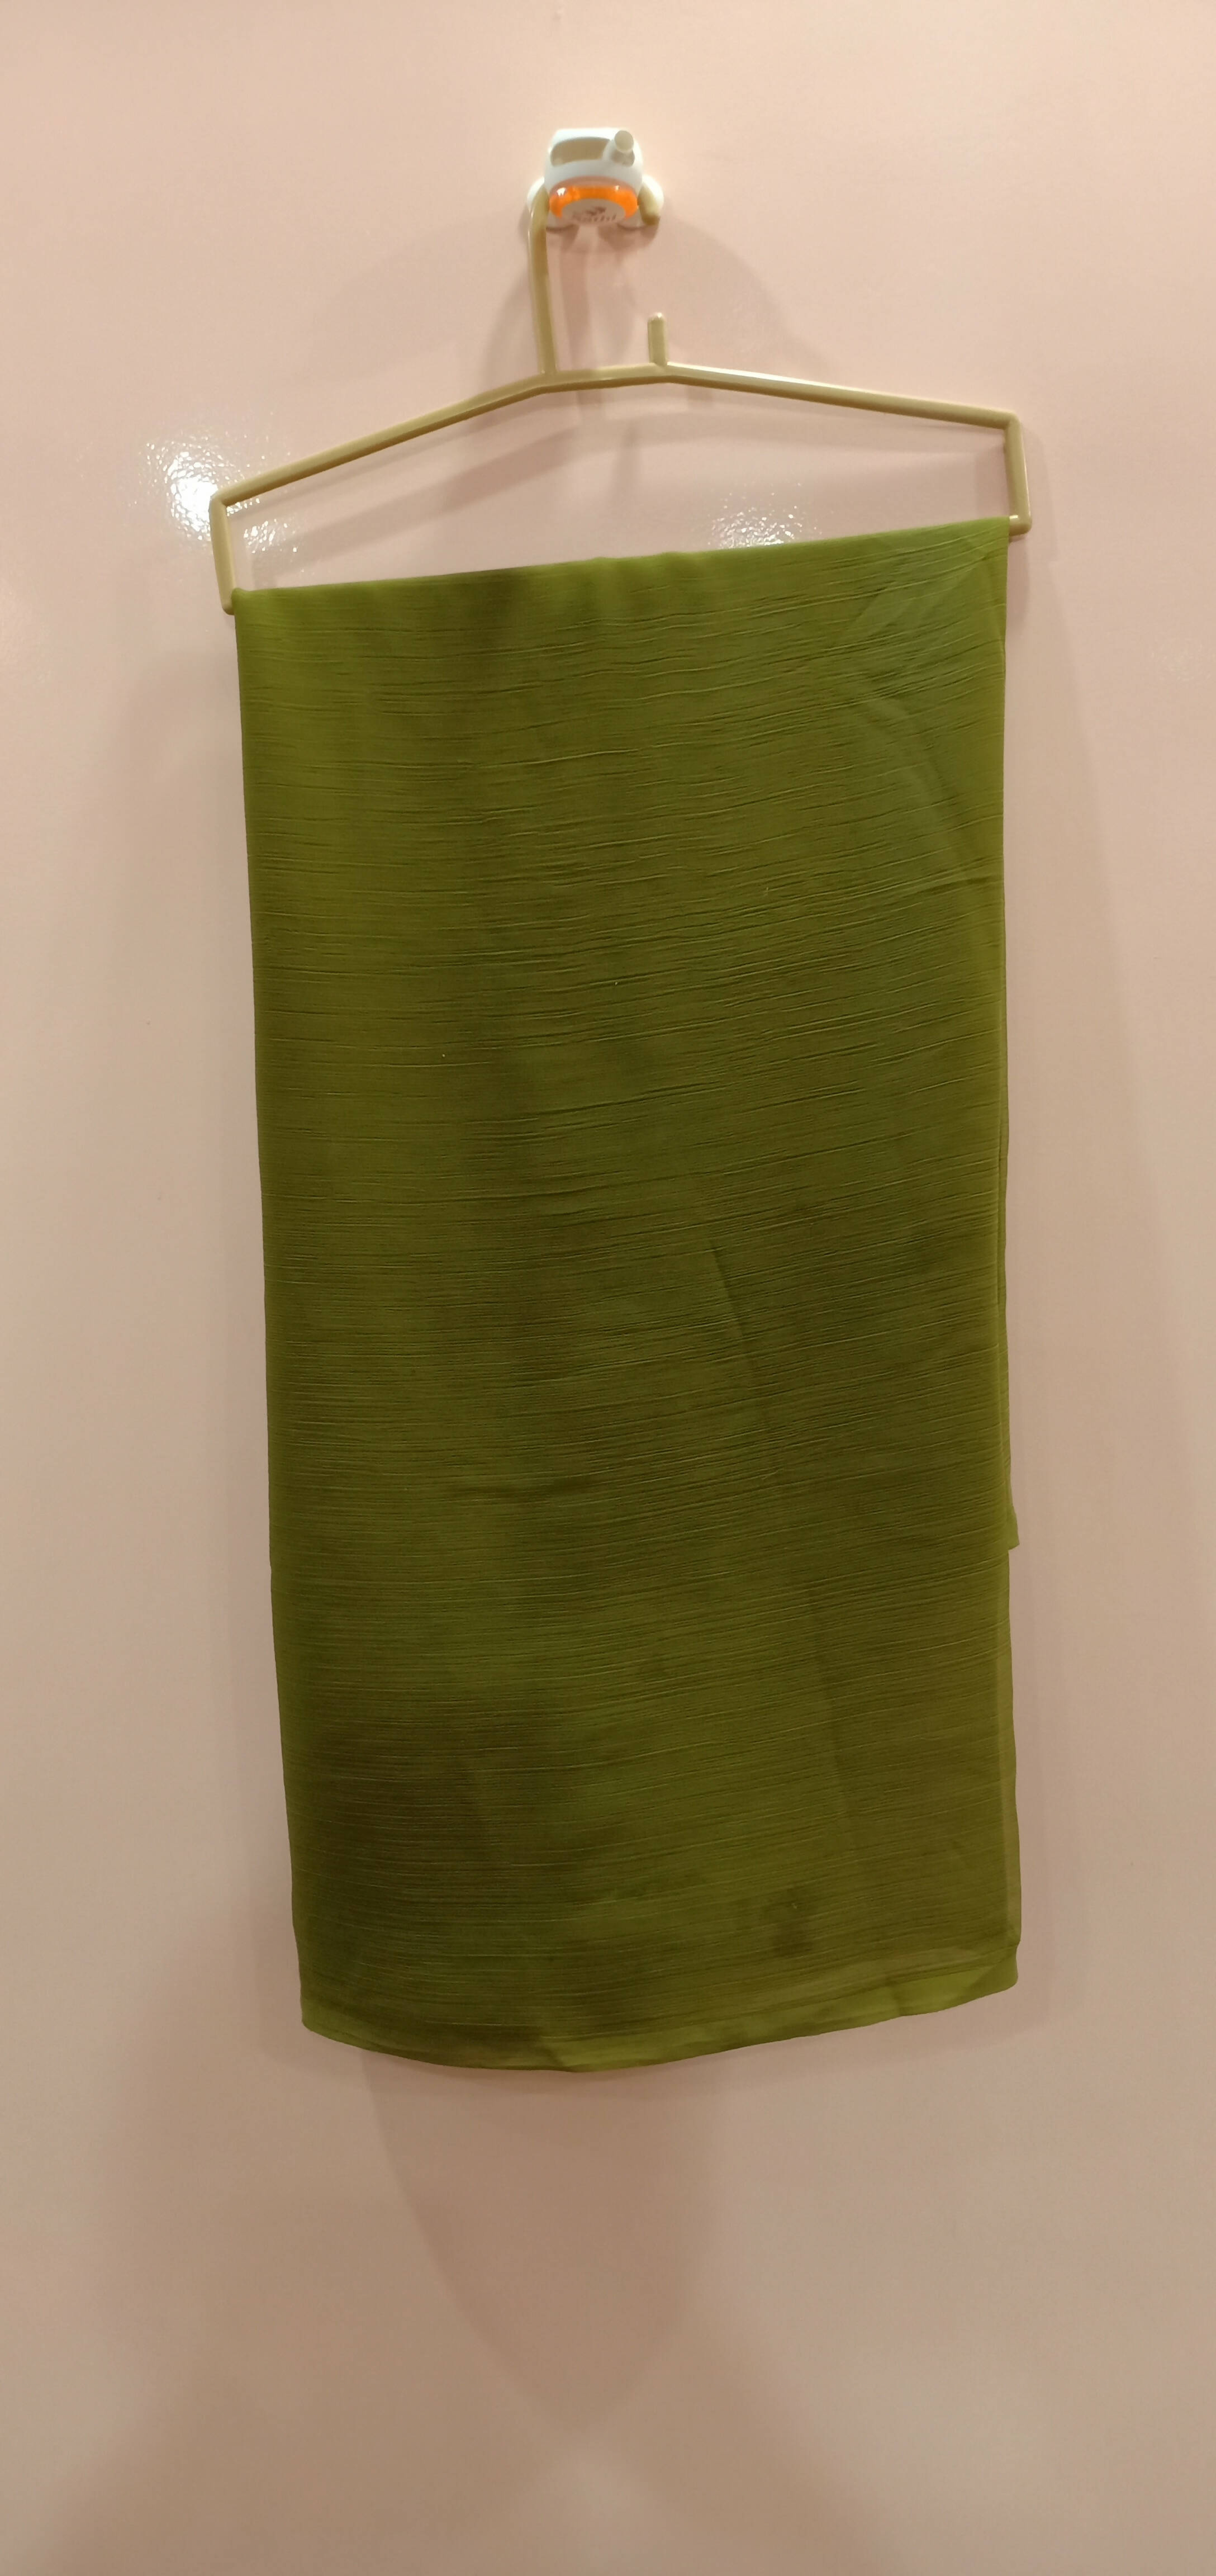 No brand | white and green linen 3 piece suit | women formal dress | worn once